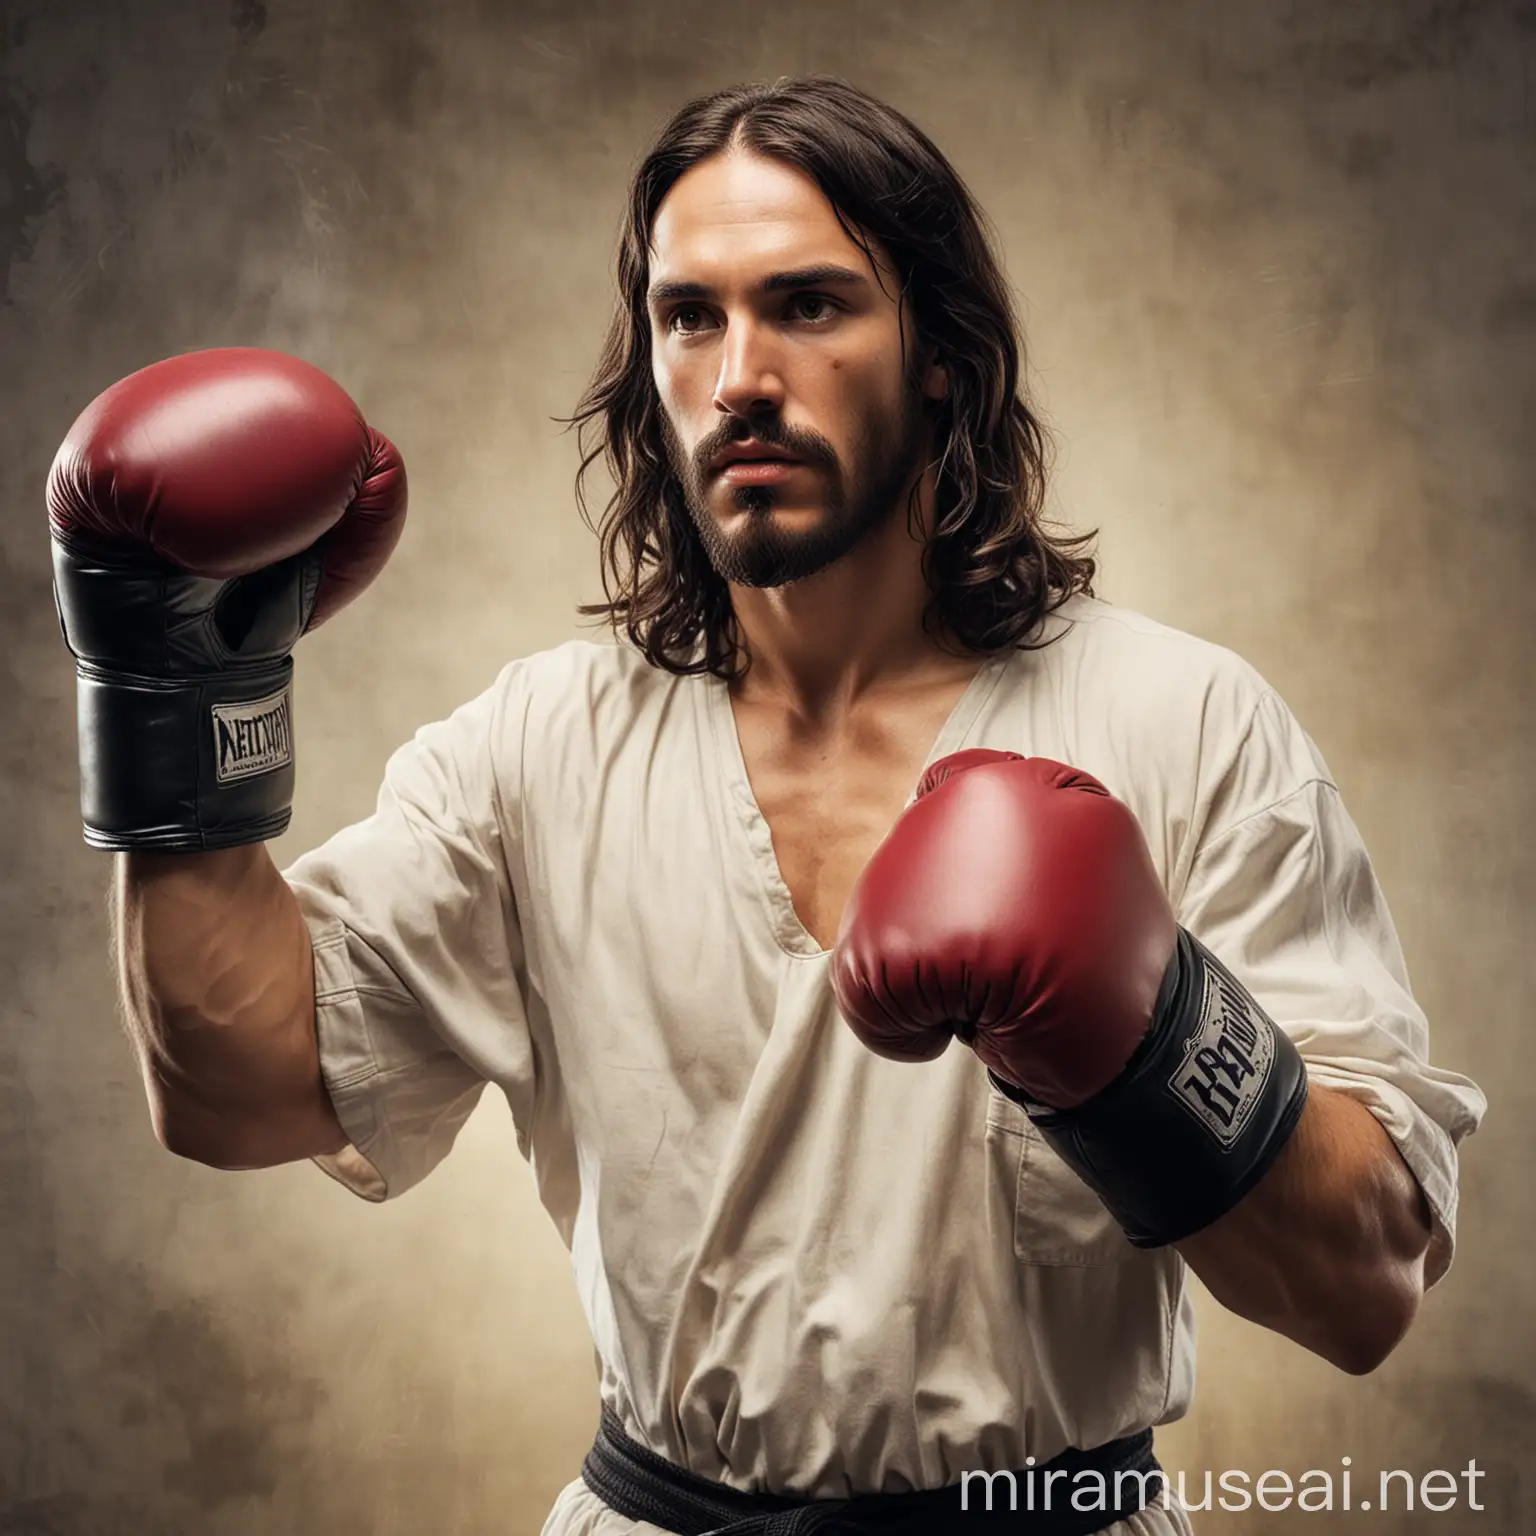 Religious Figure with Boxing Gloves Symbolic Representation of Strength and Faith